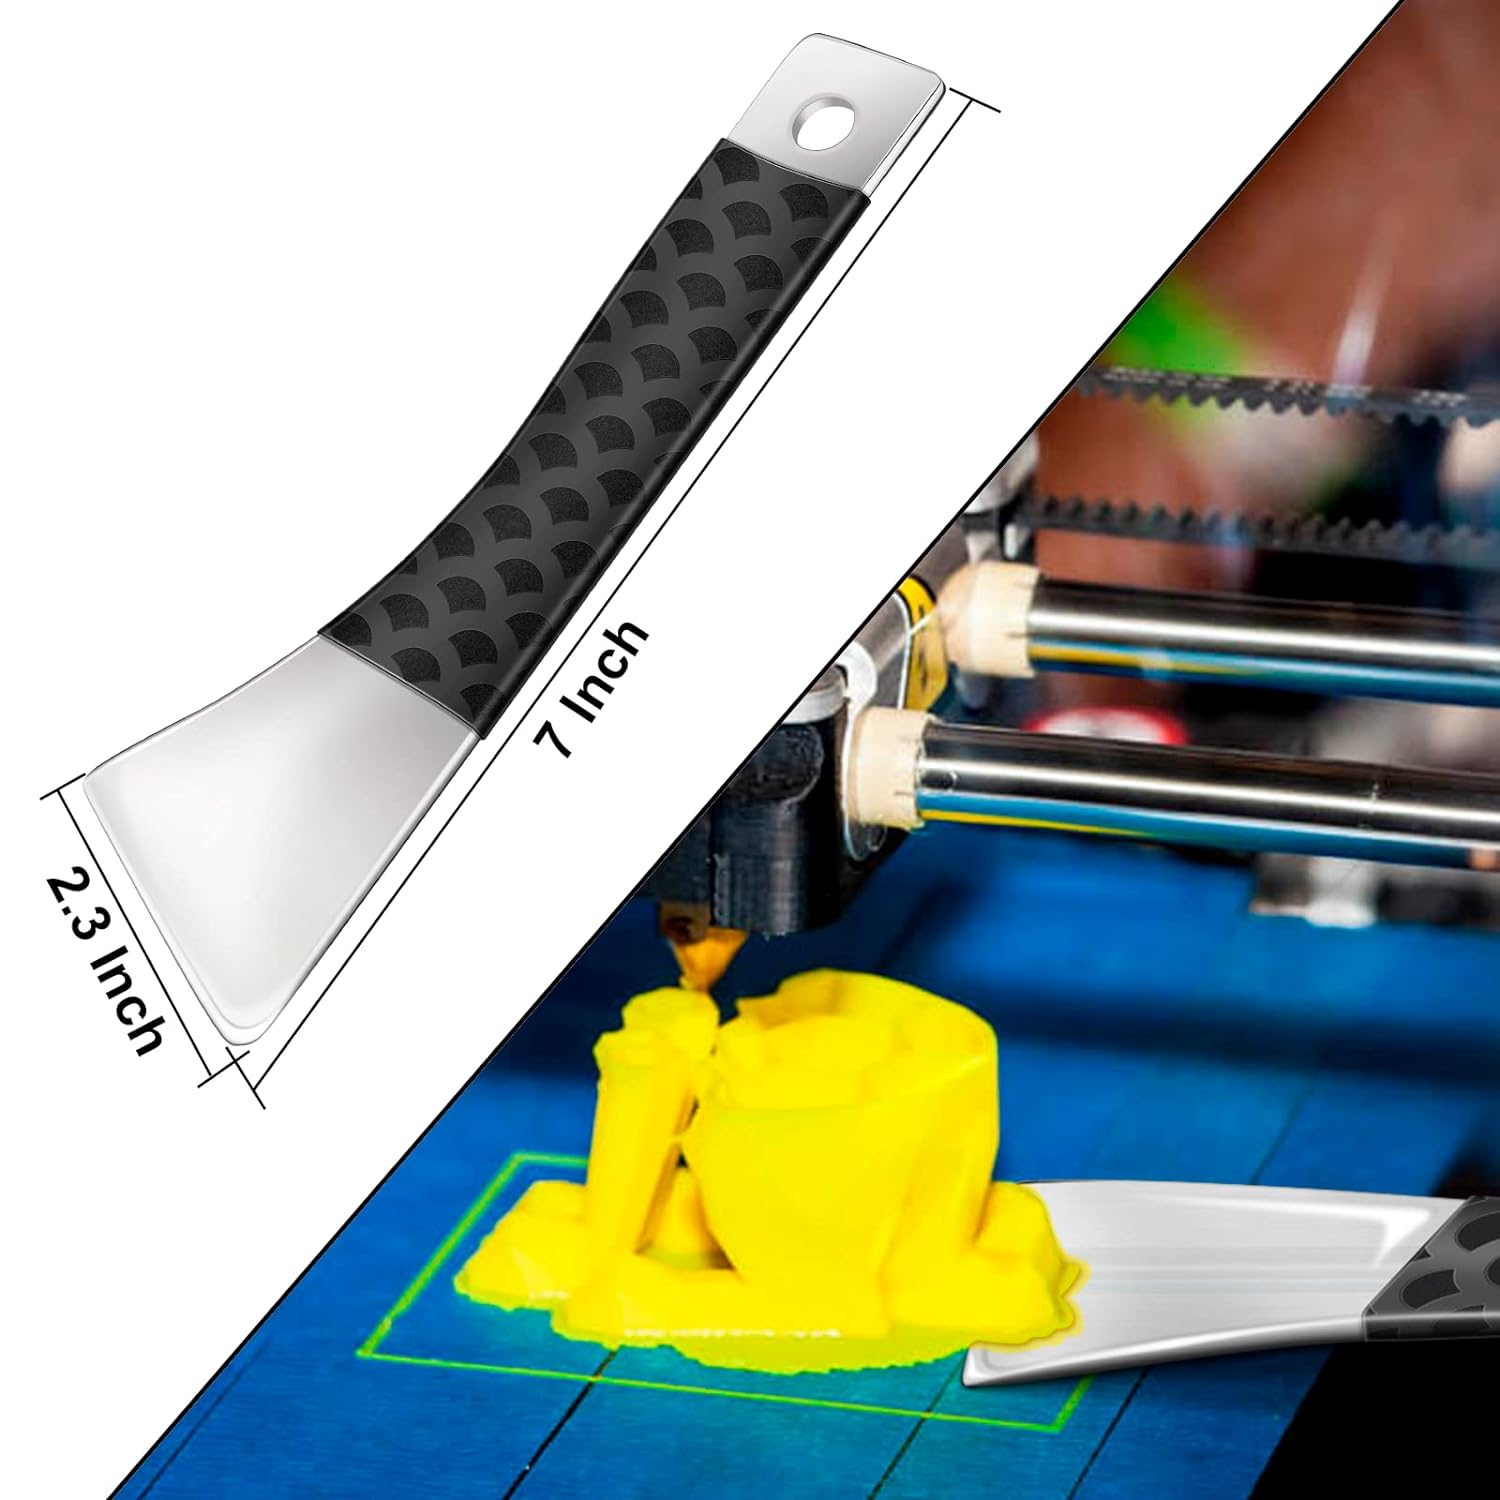 upgraded-3d-printer-scraper-tool-polished-stainless-metal-3d-printer-spatula-for-model-removal-safety-professional-3d-pr-1 Upgraded 3D Printer Scraper Tool Review